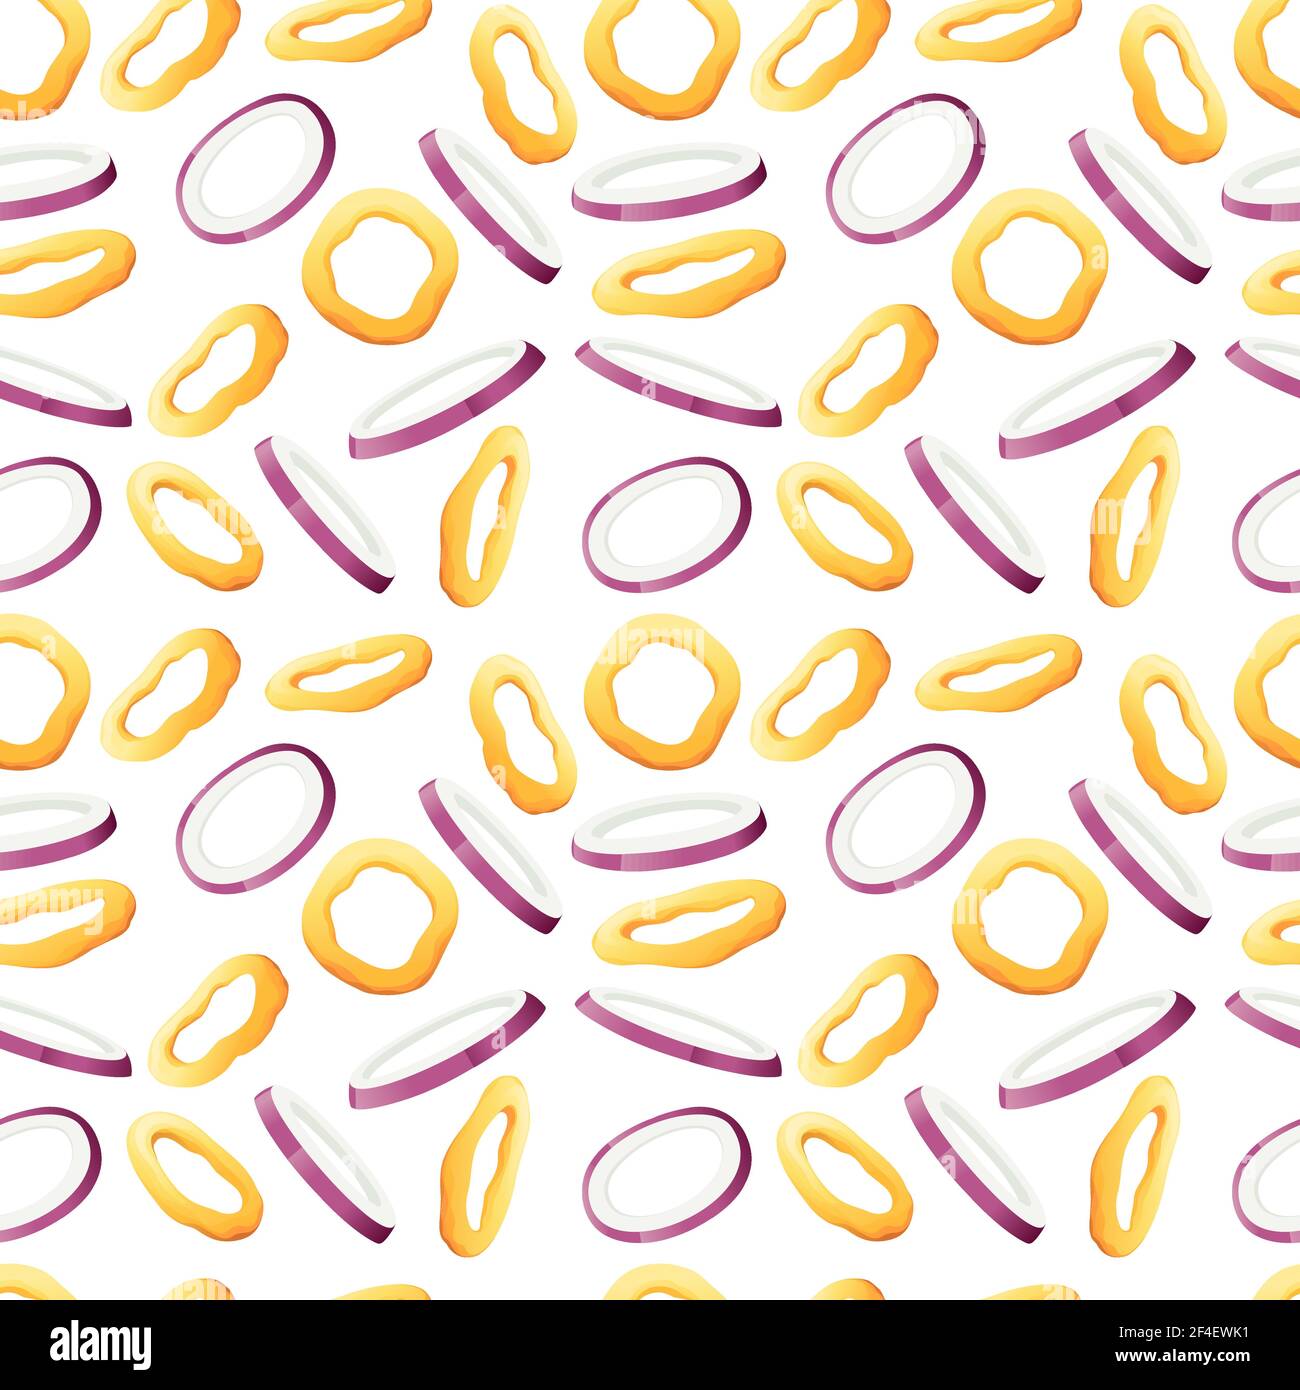 Onion Ring PNG Picture, Illustration Of Snack Onion Rings, Onion Ring  Illustration, Cartoon Illustration, Snack Illustration PNG Image For Free  Download